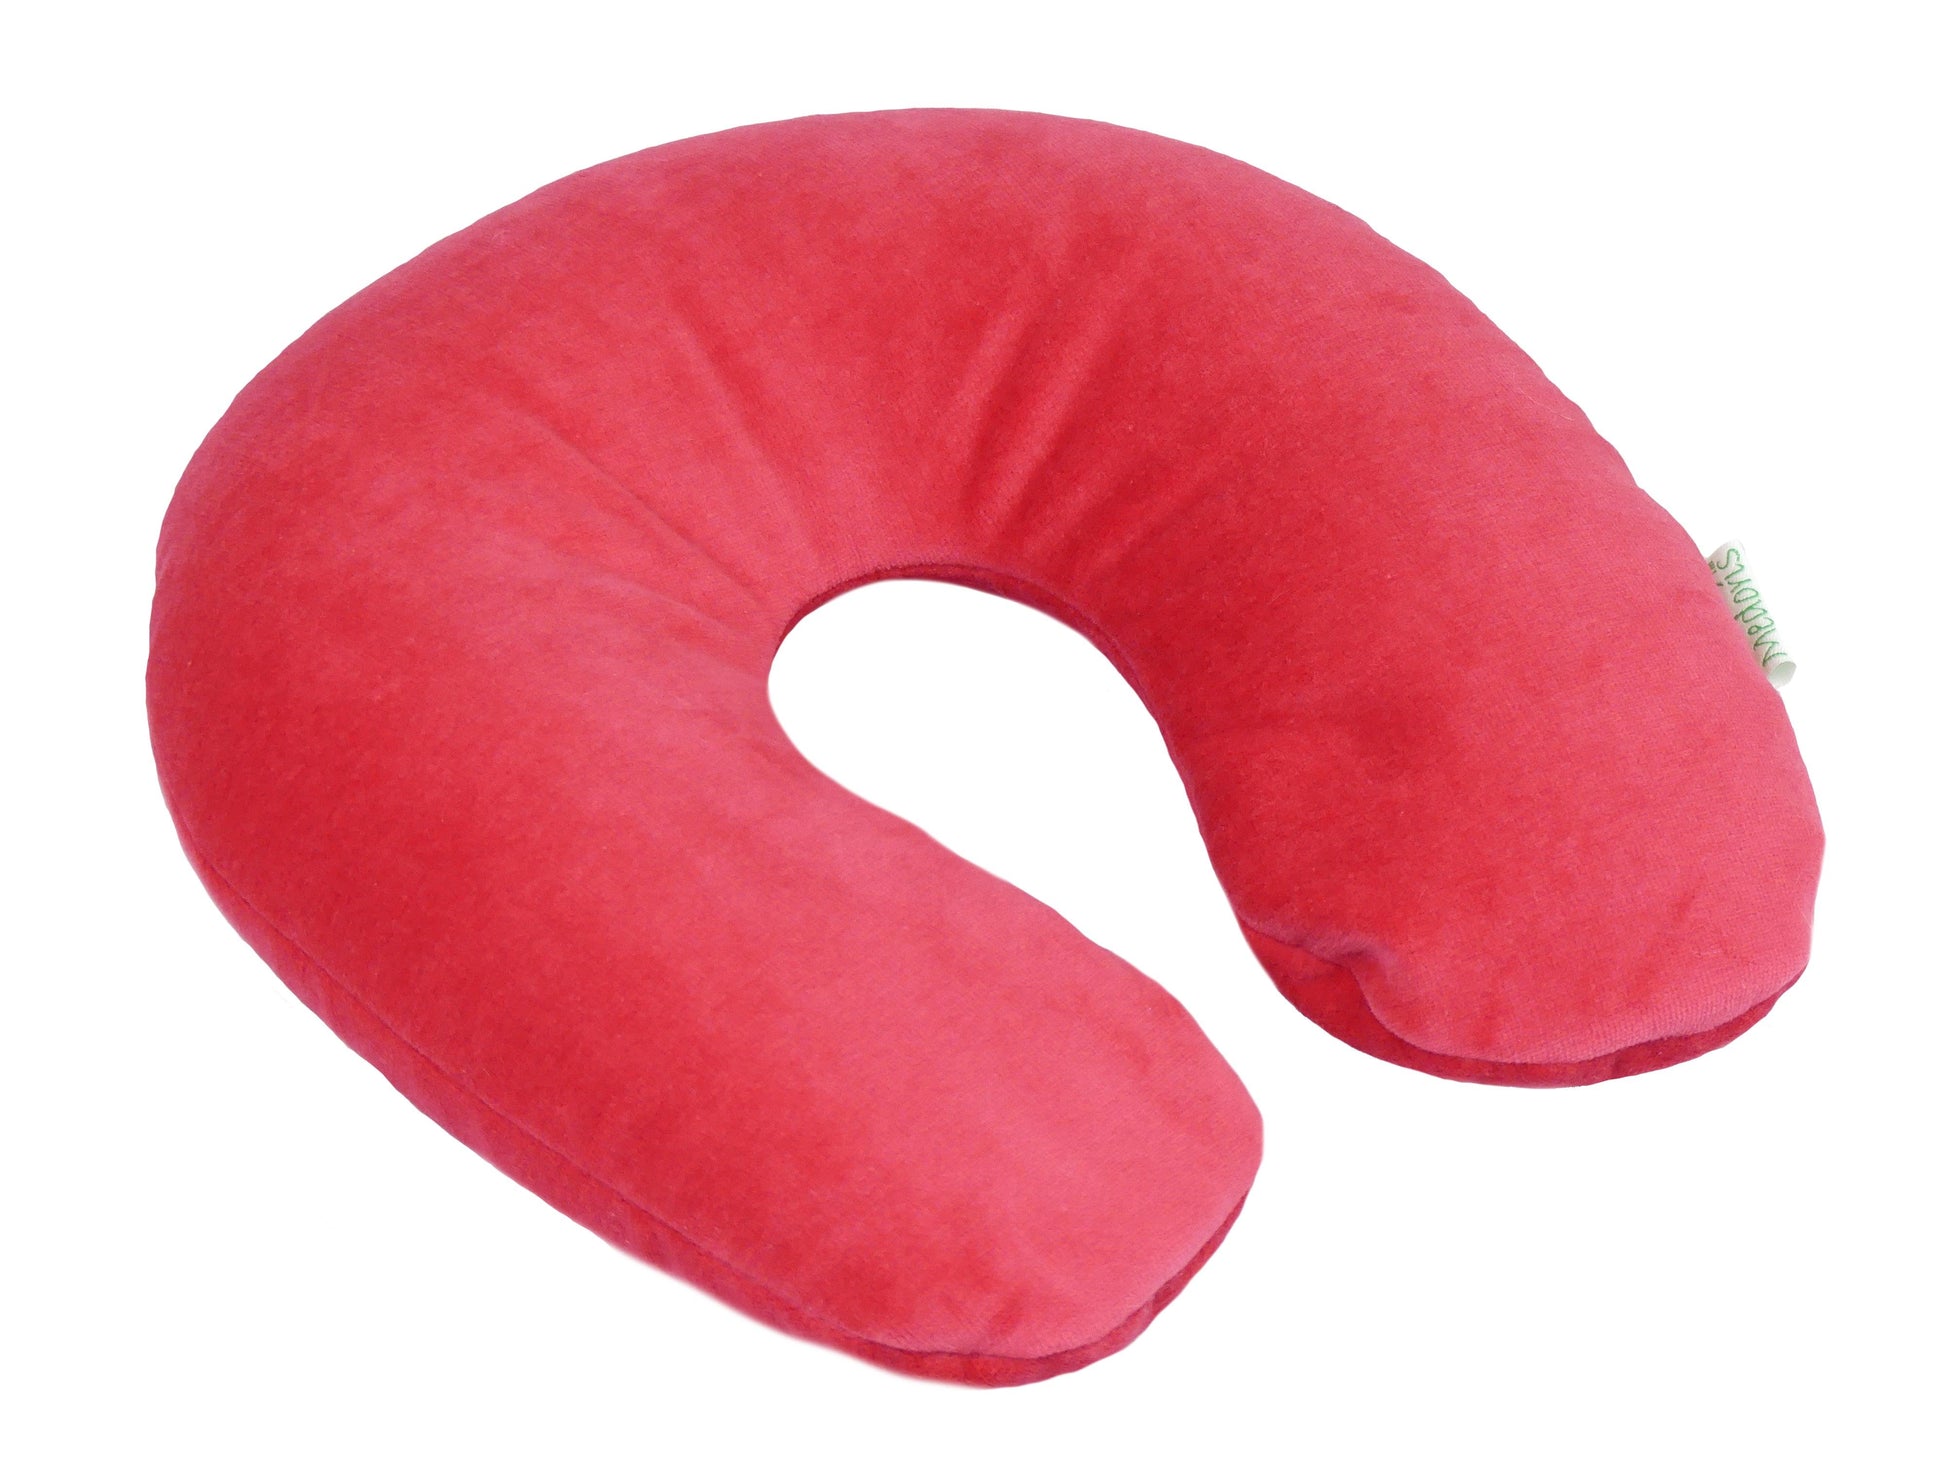 Possitioning and Pressure Care: Horseshoe Neck Support and Pressure Relief Cushion - M223 - MEDORIS